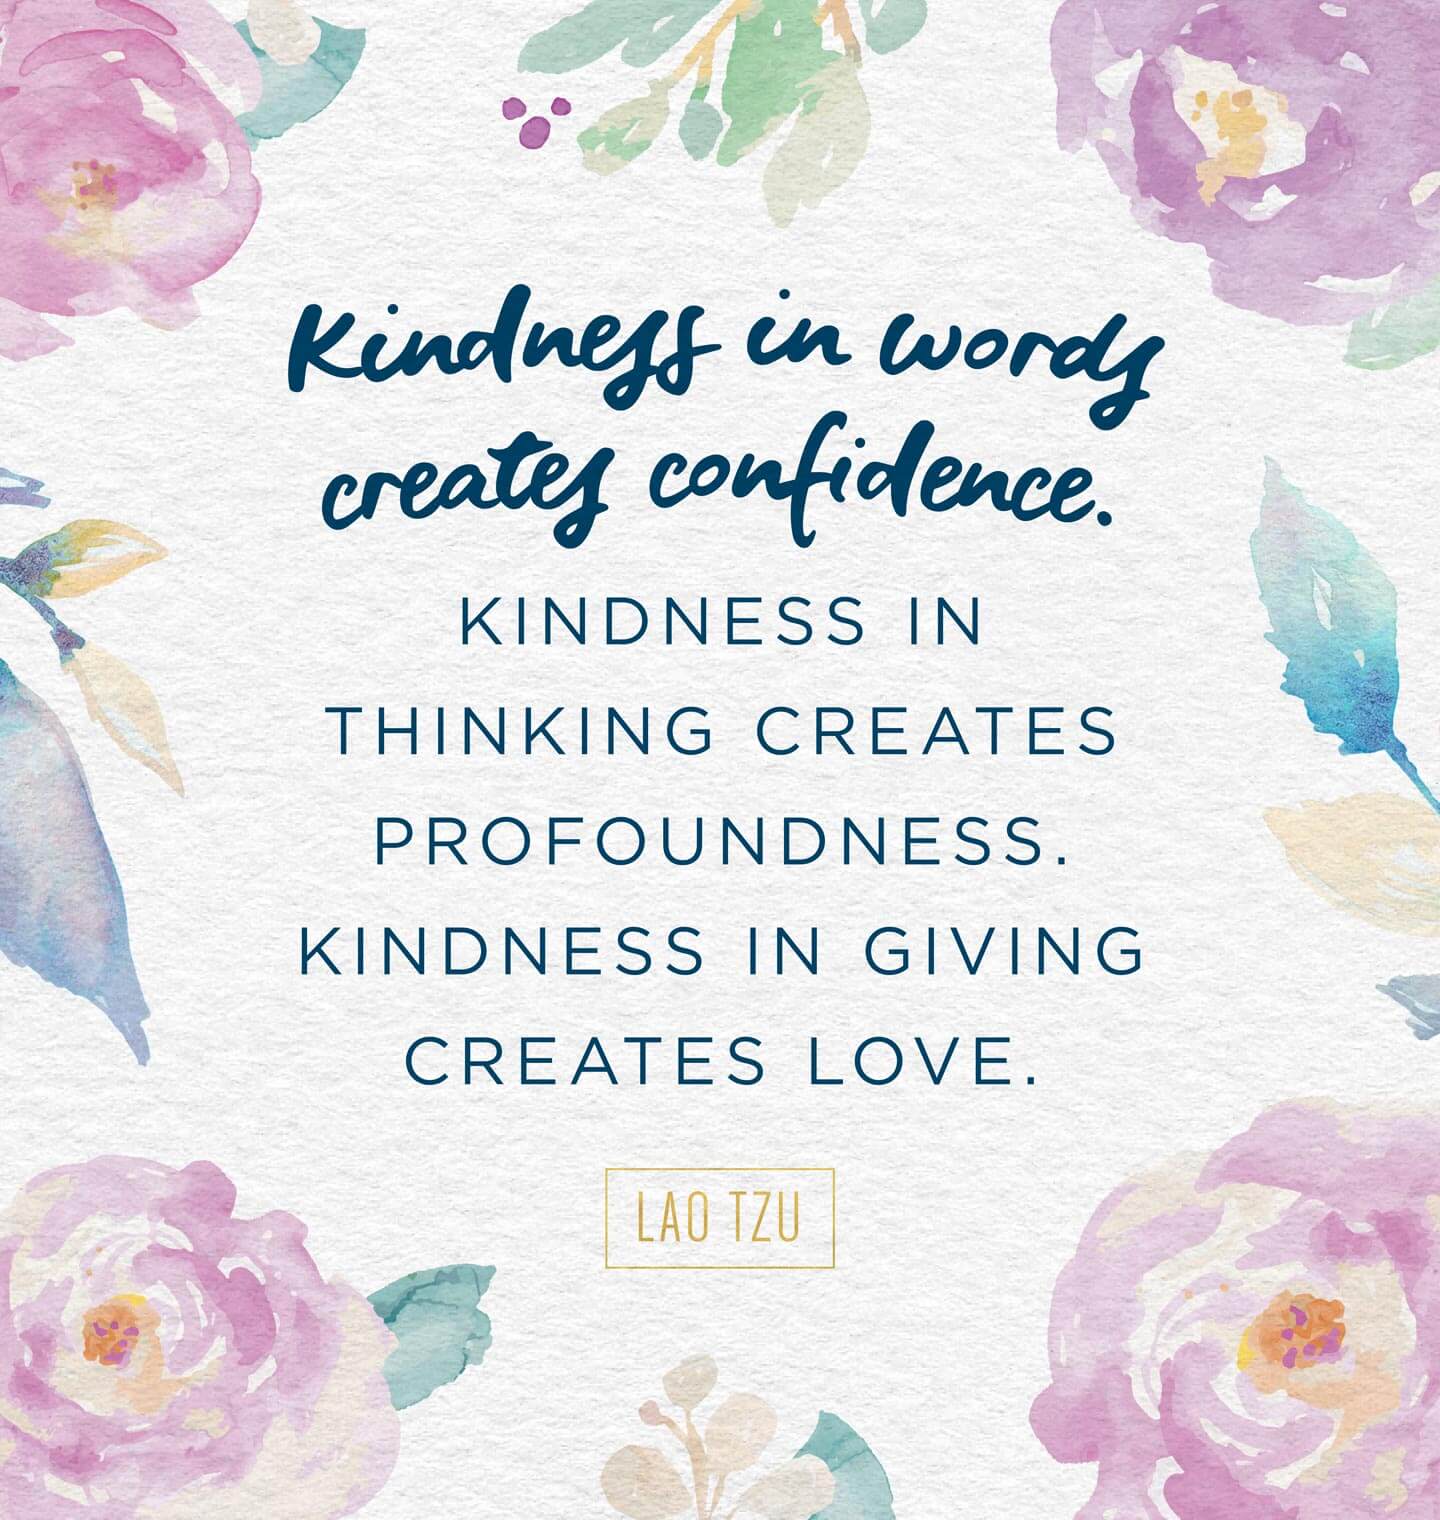 kindness-quote-5